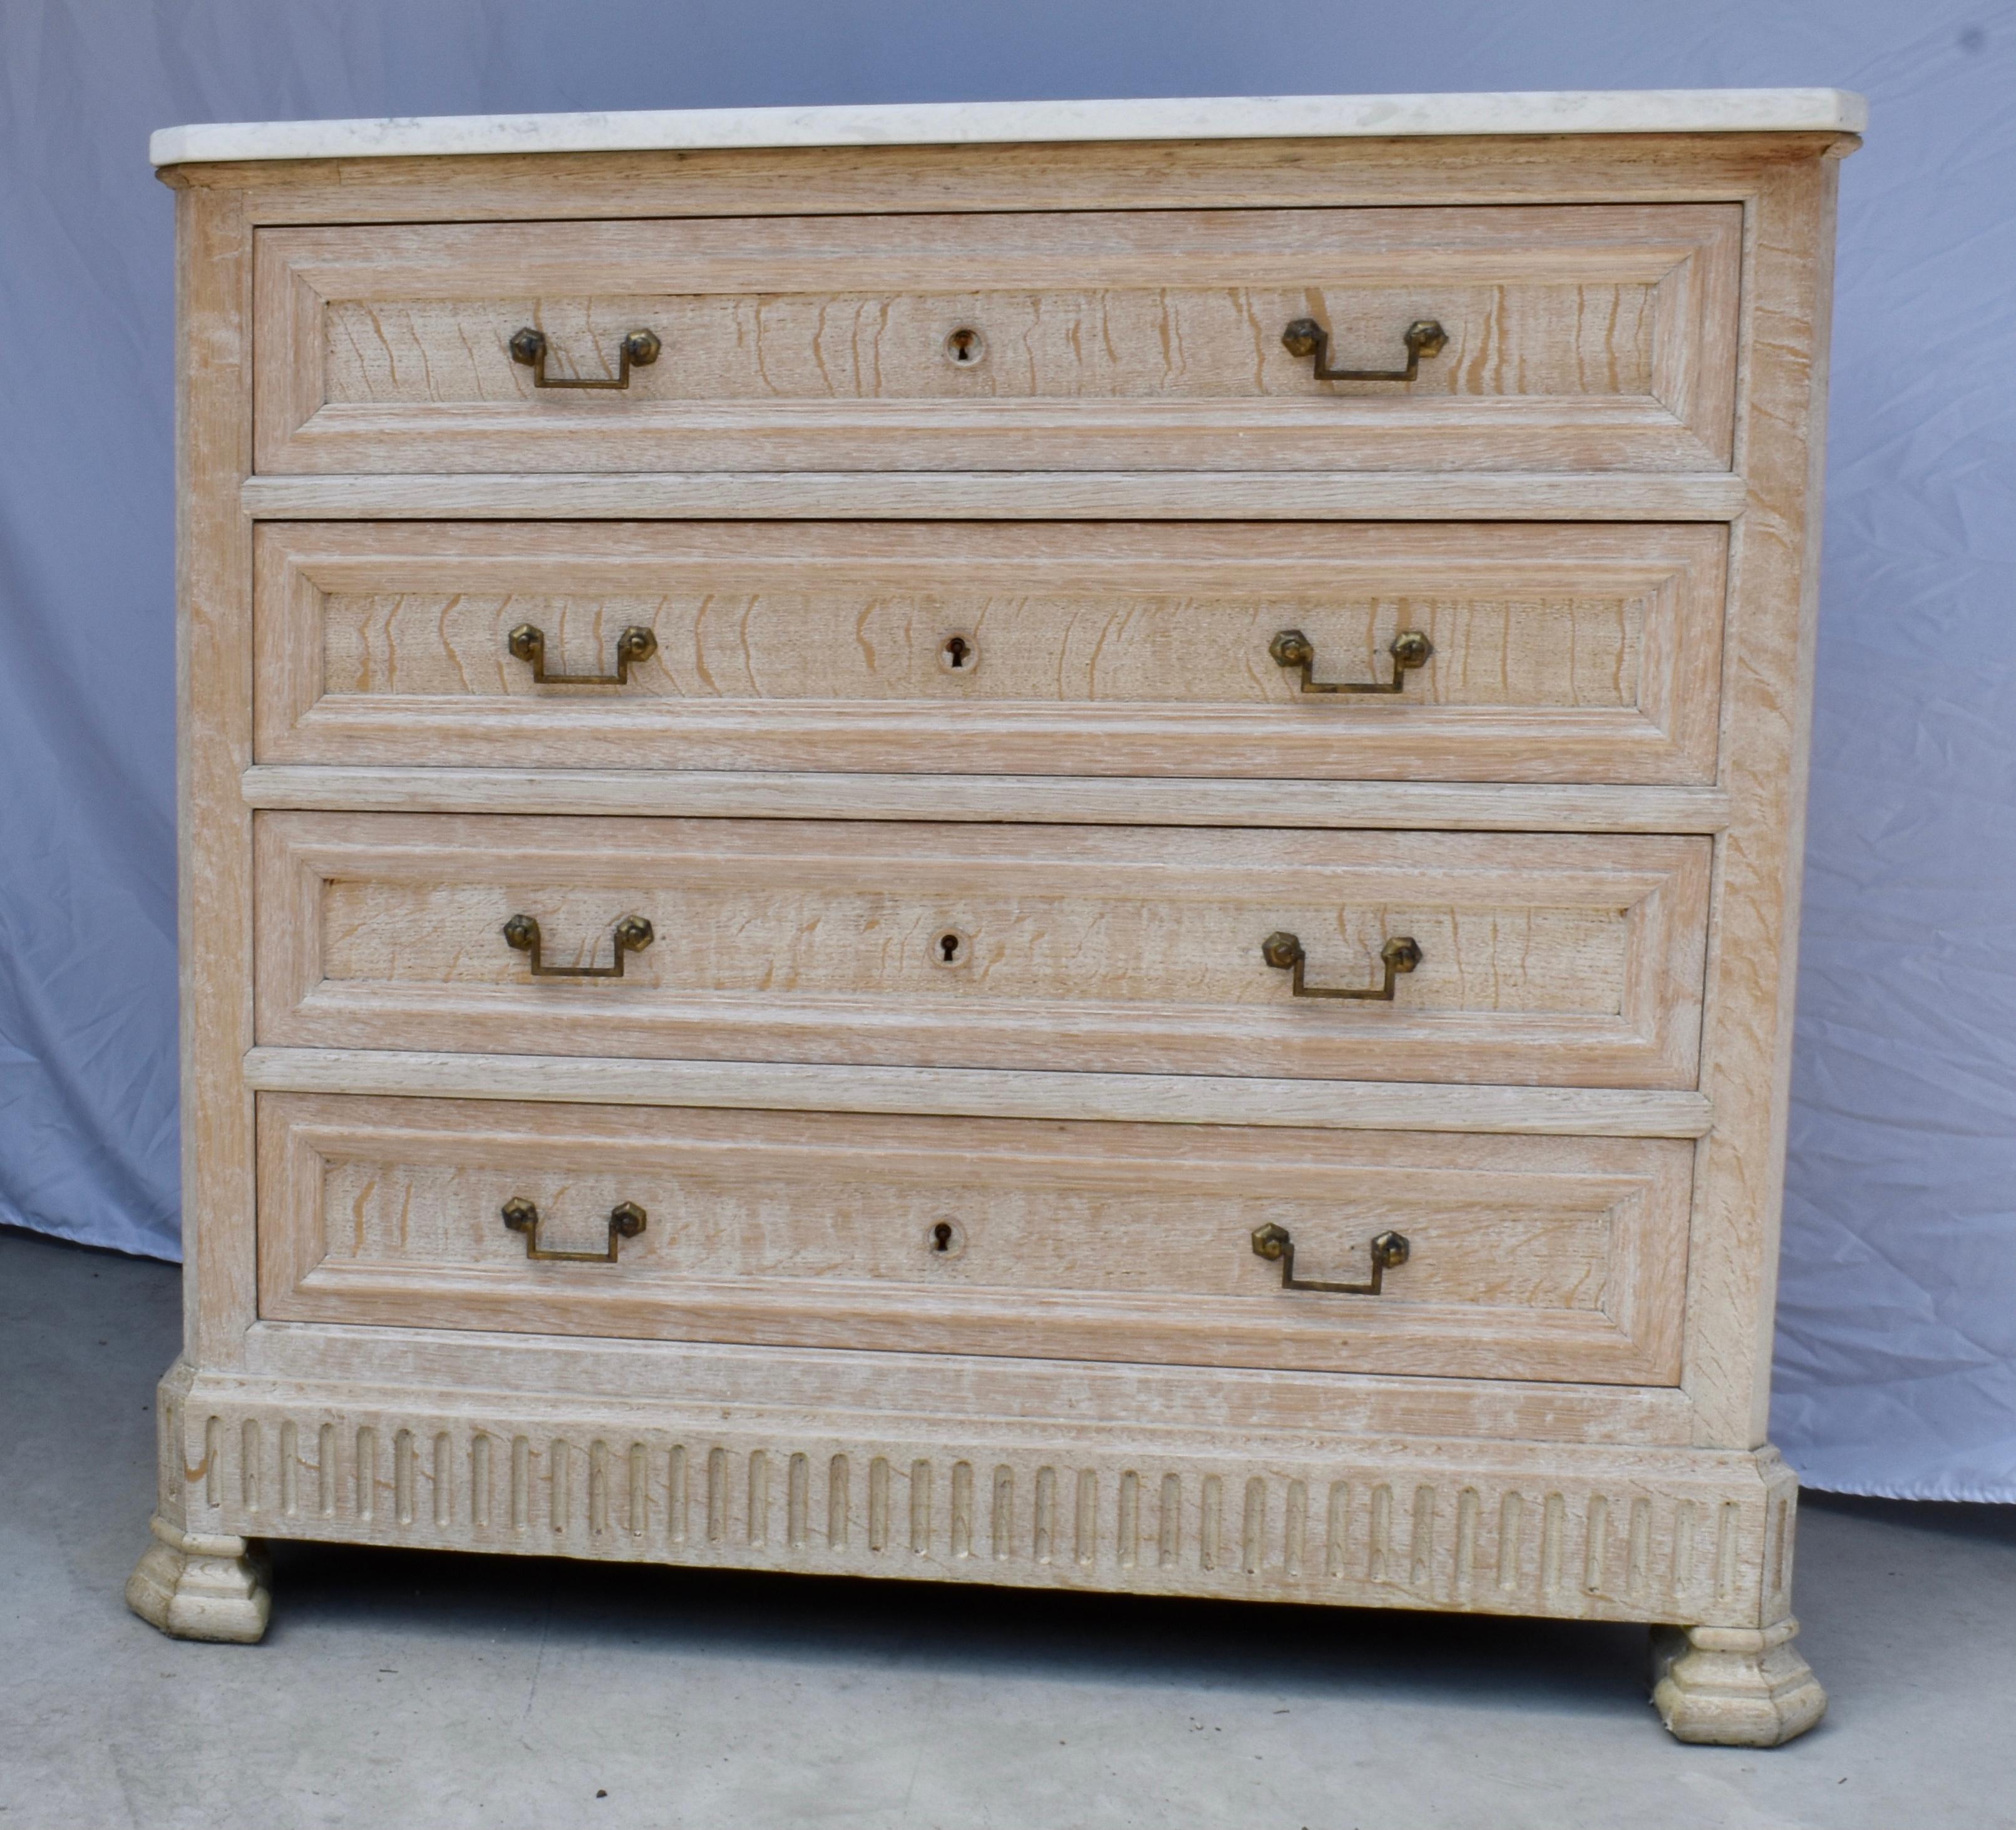 Mid 1800s commode made in France using oak with a white marble top. The commode has a small size and overall linear and simple appearance. The chest features four inset drawers all framed by molding, all showing beautiful hand-made dovetailed